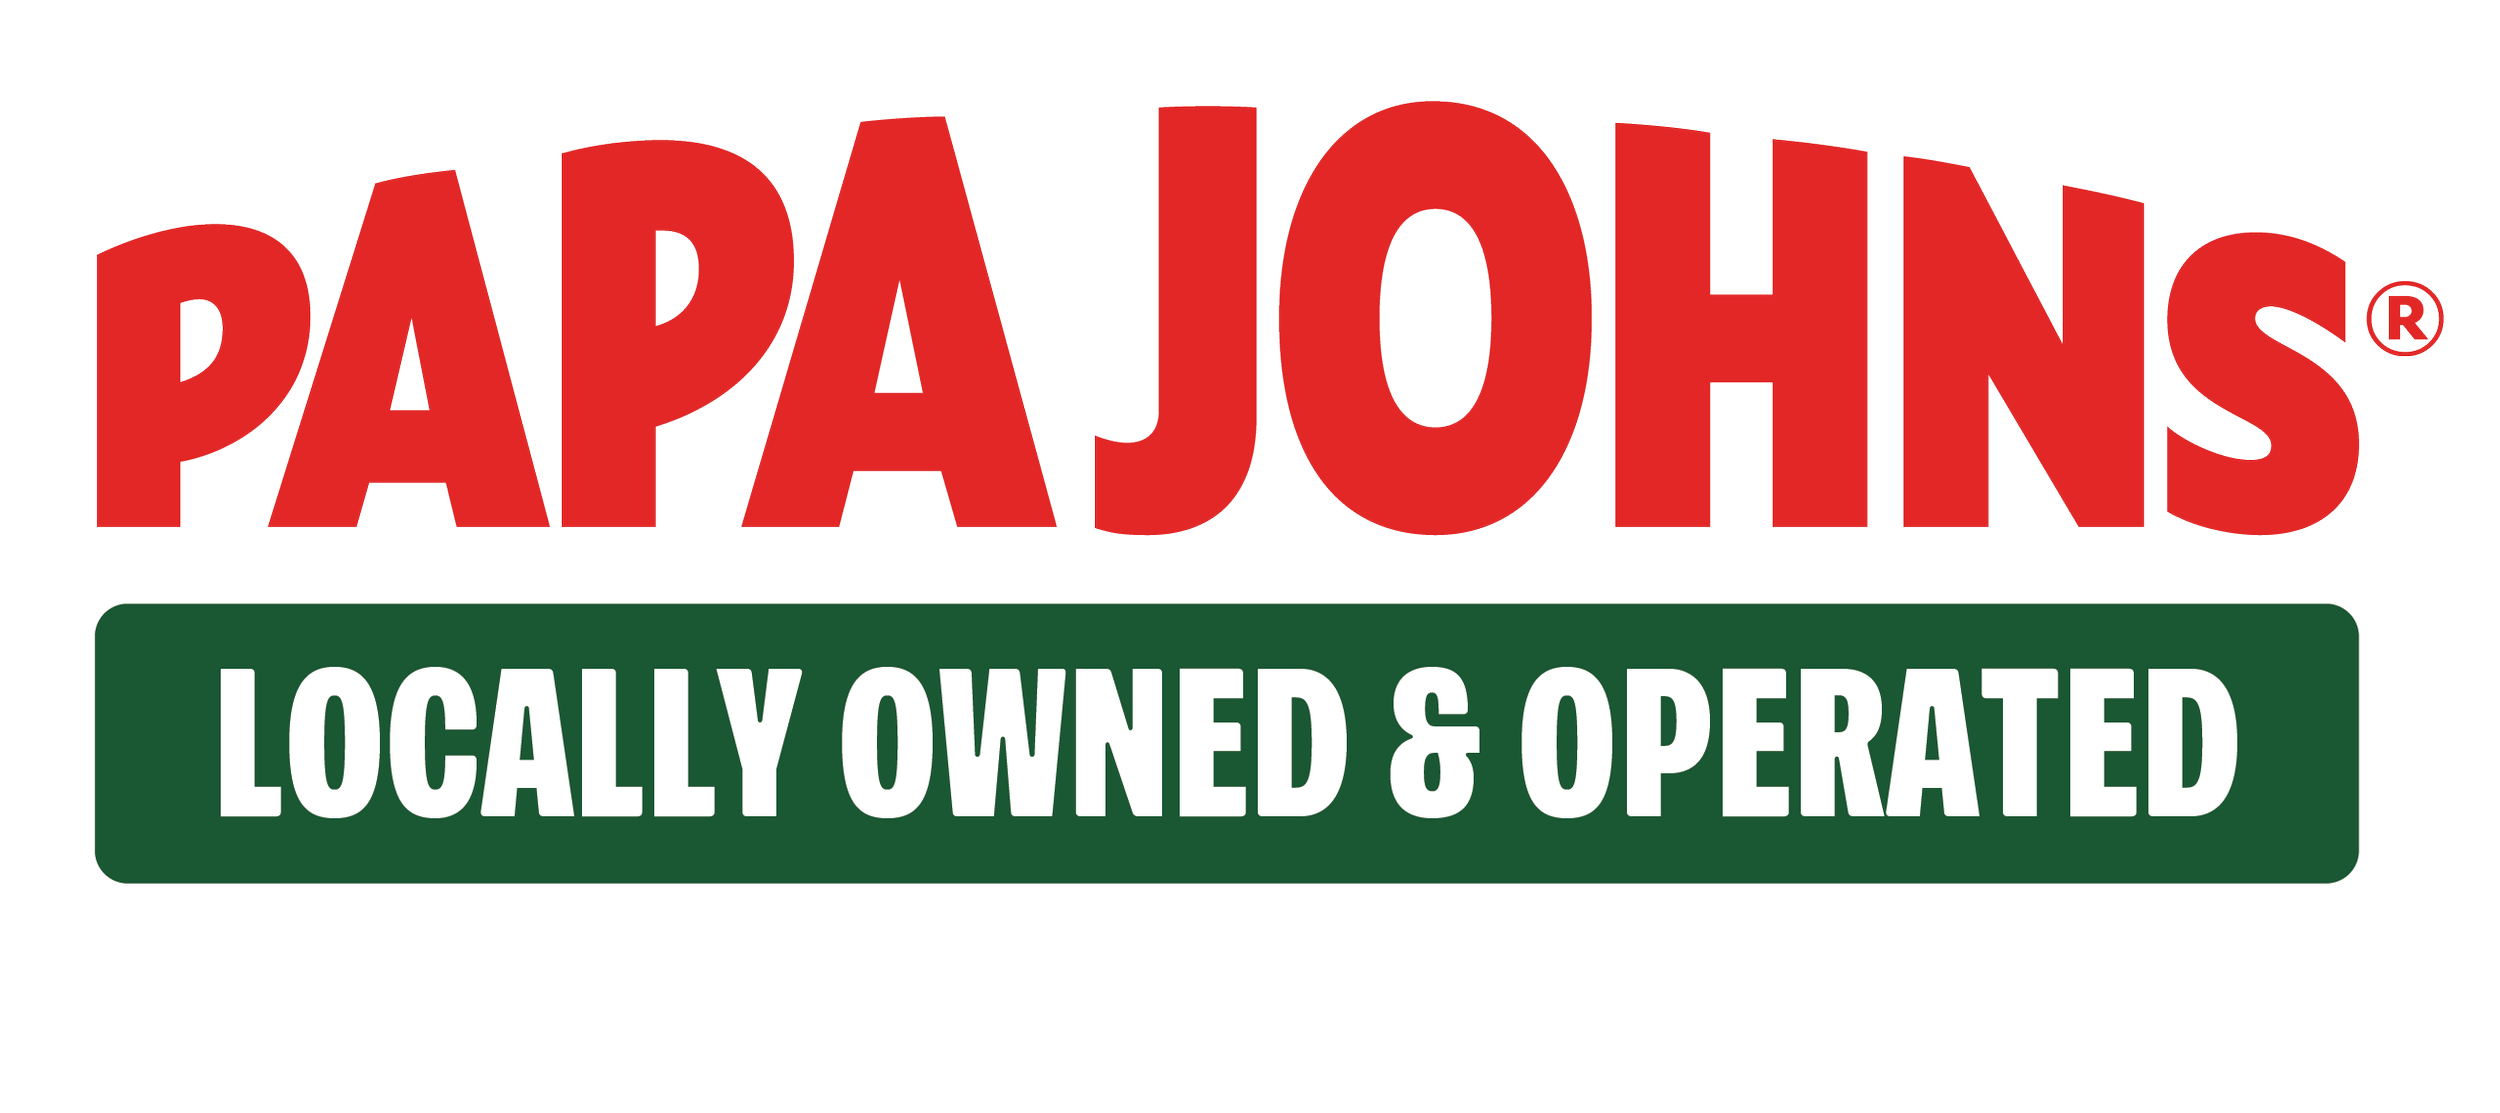 Papa John's gives out free pizzas to educators. All of the coupon